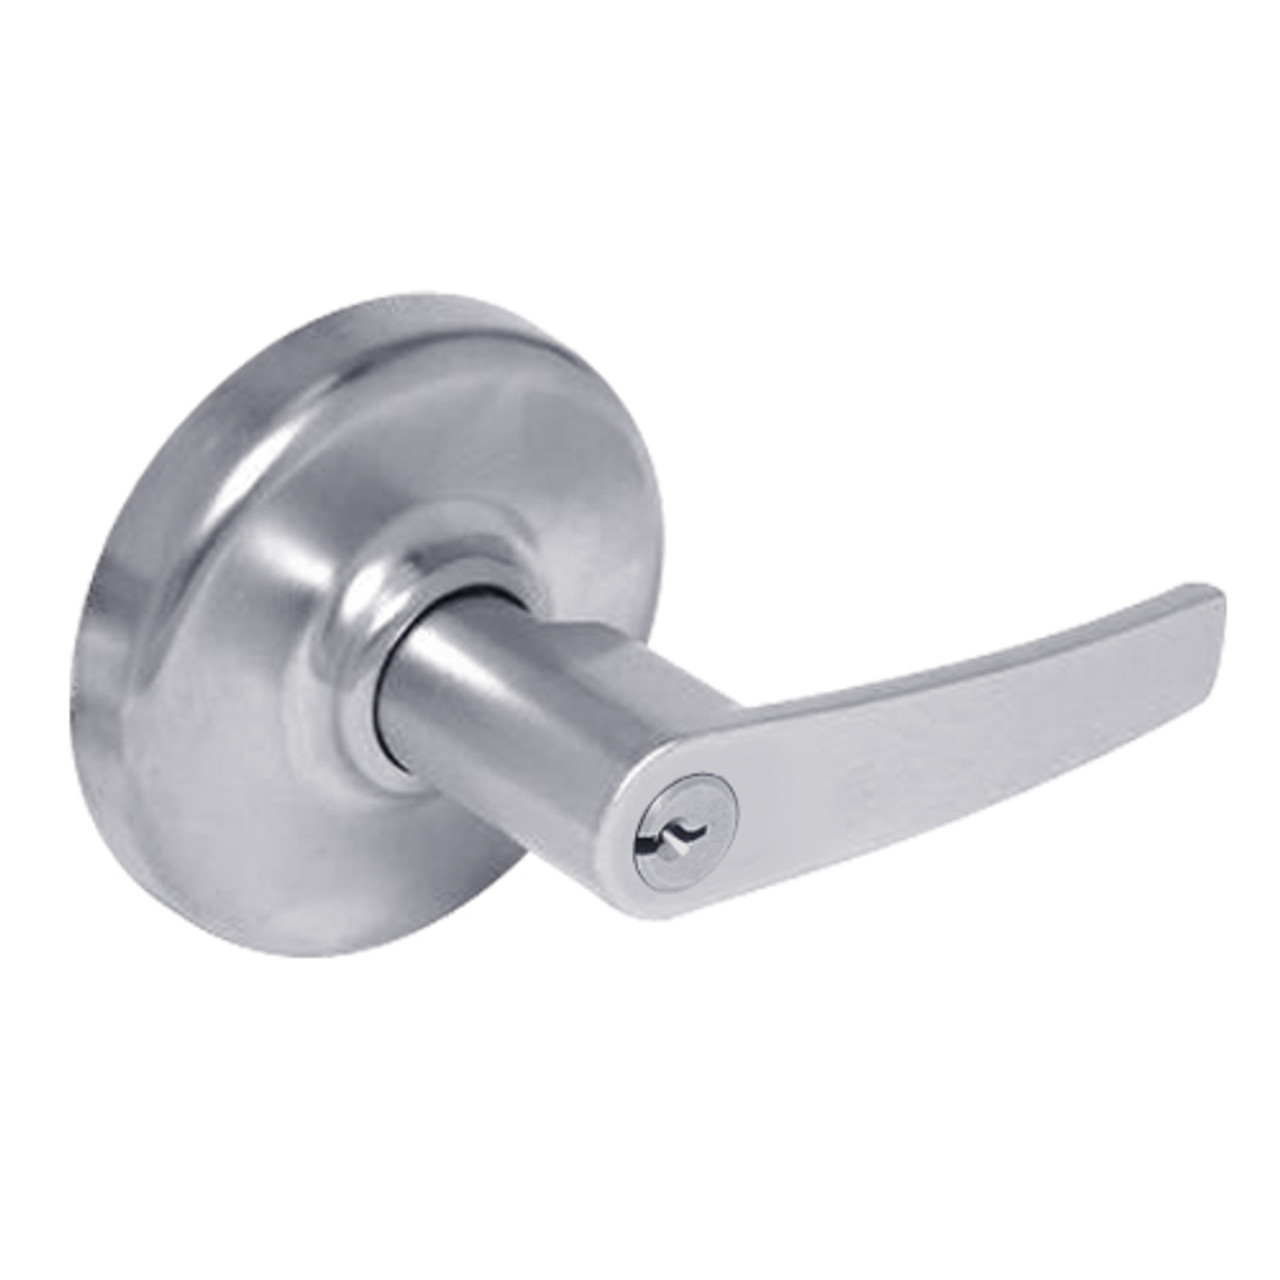 CL3381-AZD-626 Corbin CL3300 Series Extra Heavy Duty Keyed with Blank Plate Cylindrical Locksets with Armstrong Lever in Satin Chrome Finish